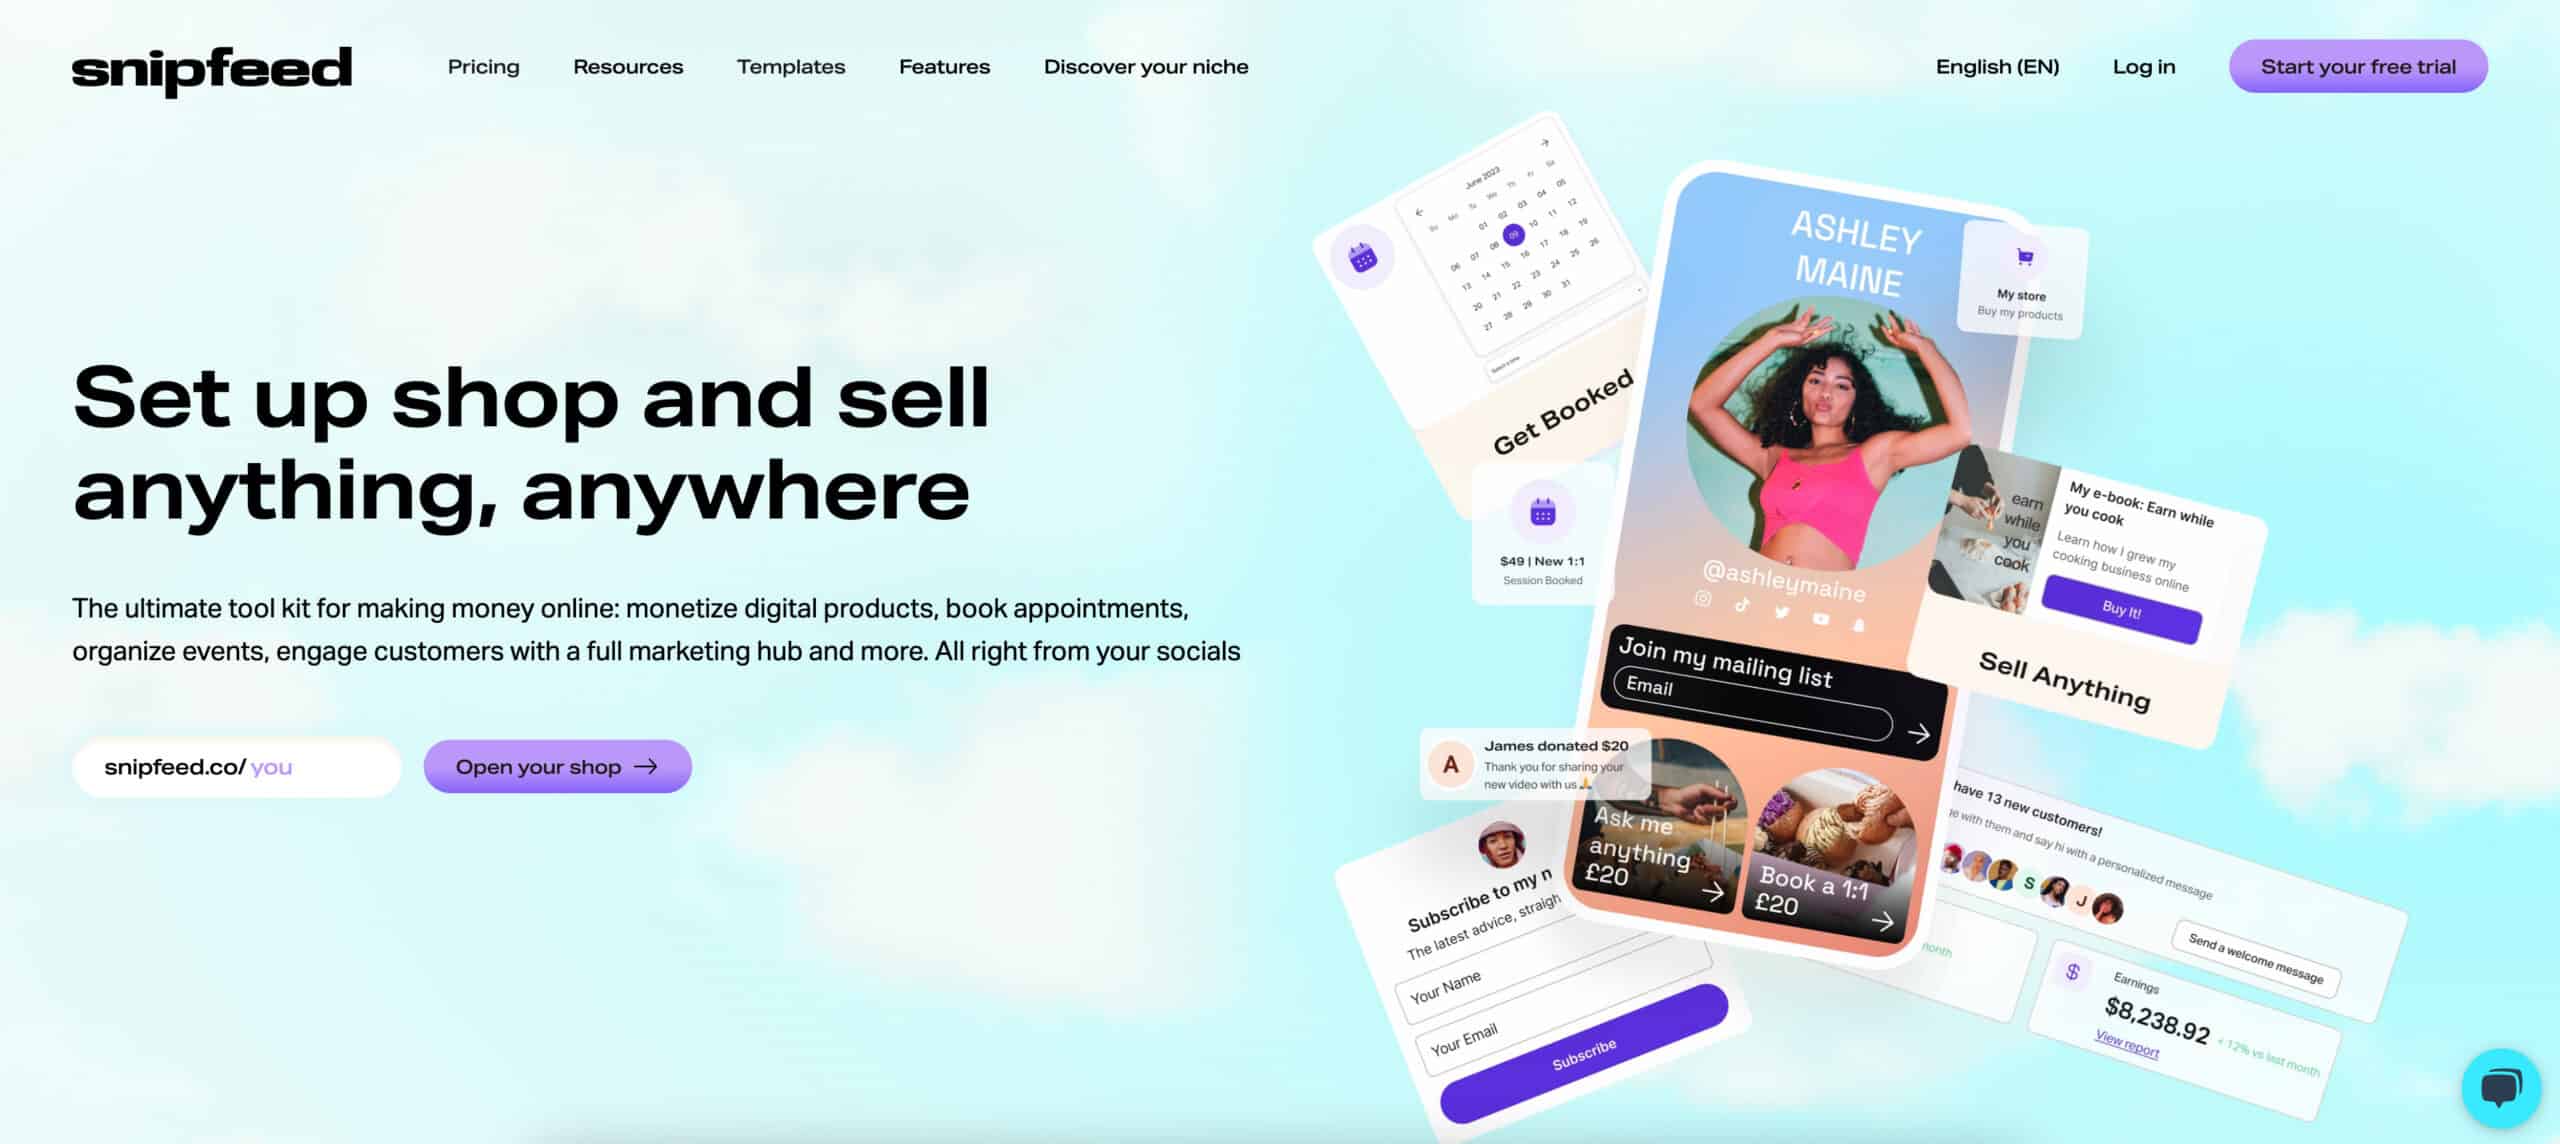 snipfeed creator store platform sell digital products